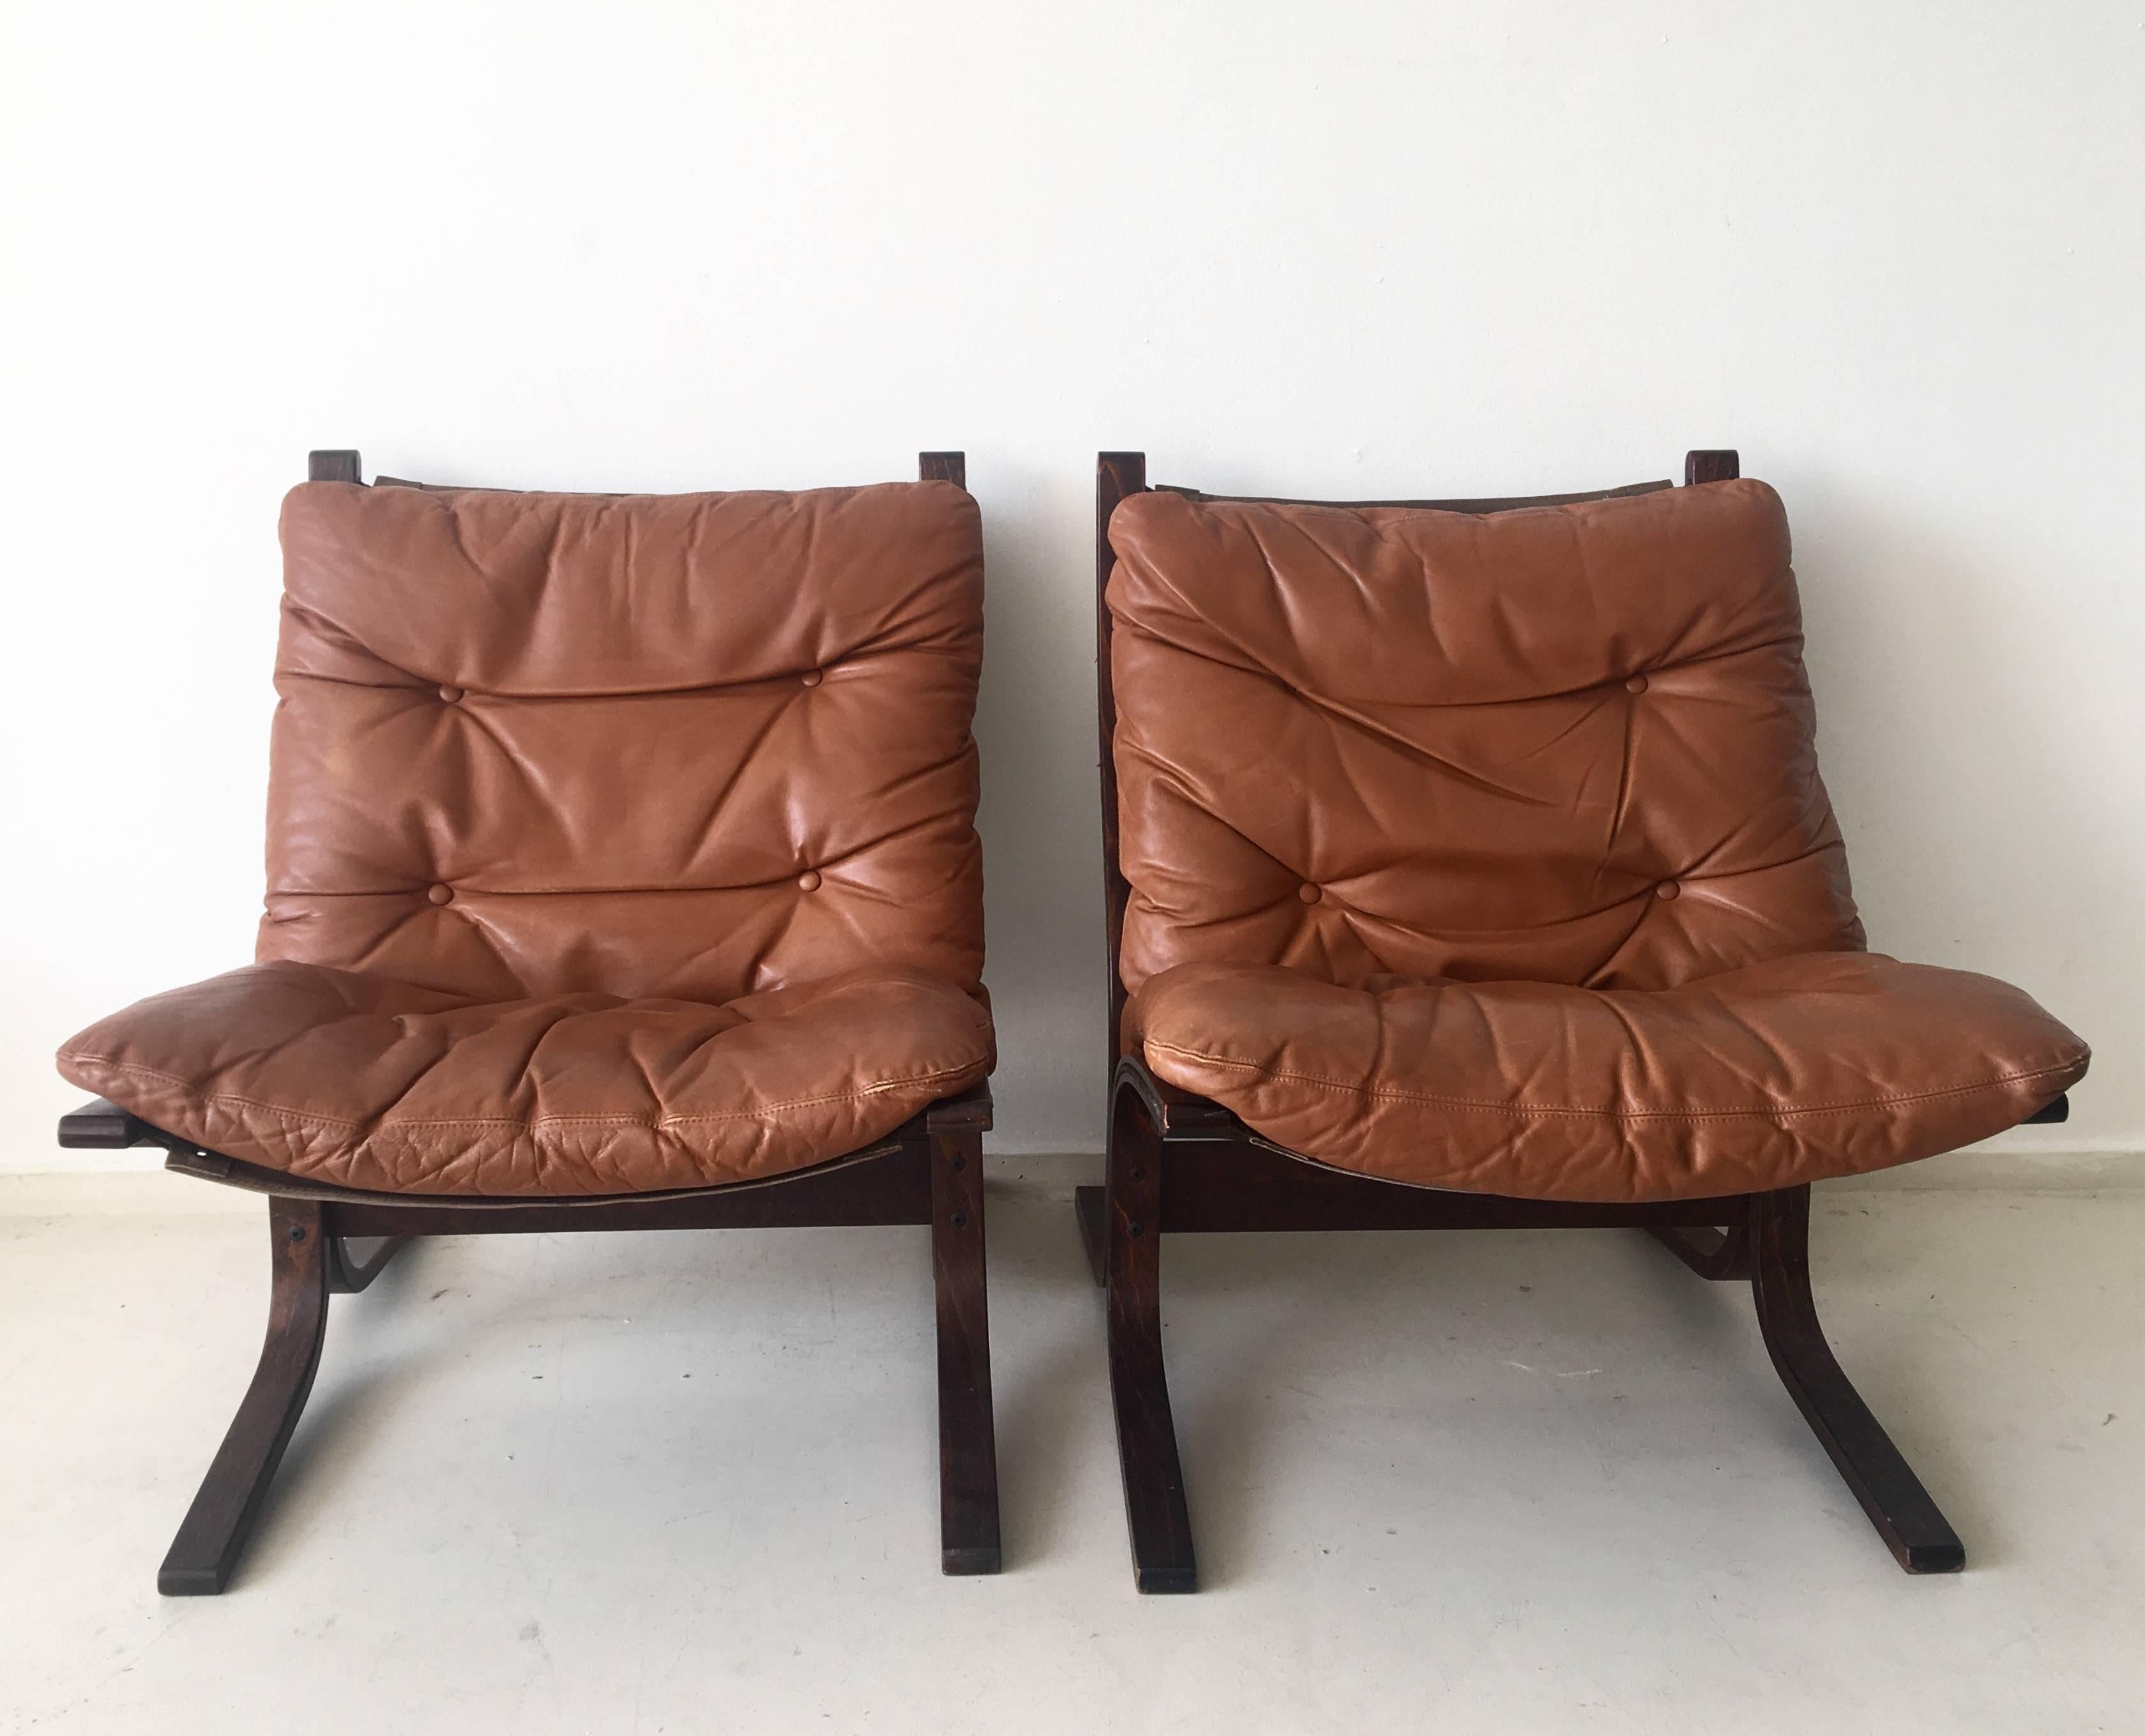 Wonderful set of easy/lounge chairs, which come with a beautiful bentwood frame and cognac coloured leather upholstery on top of canvas. They remain in a very good vintage condition, with normal signs of age and use.